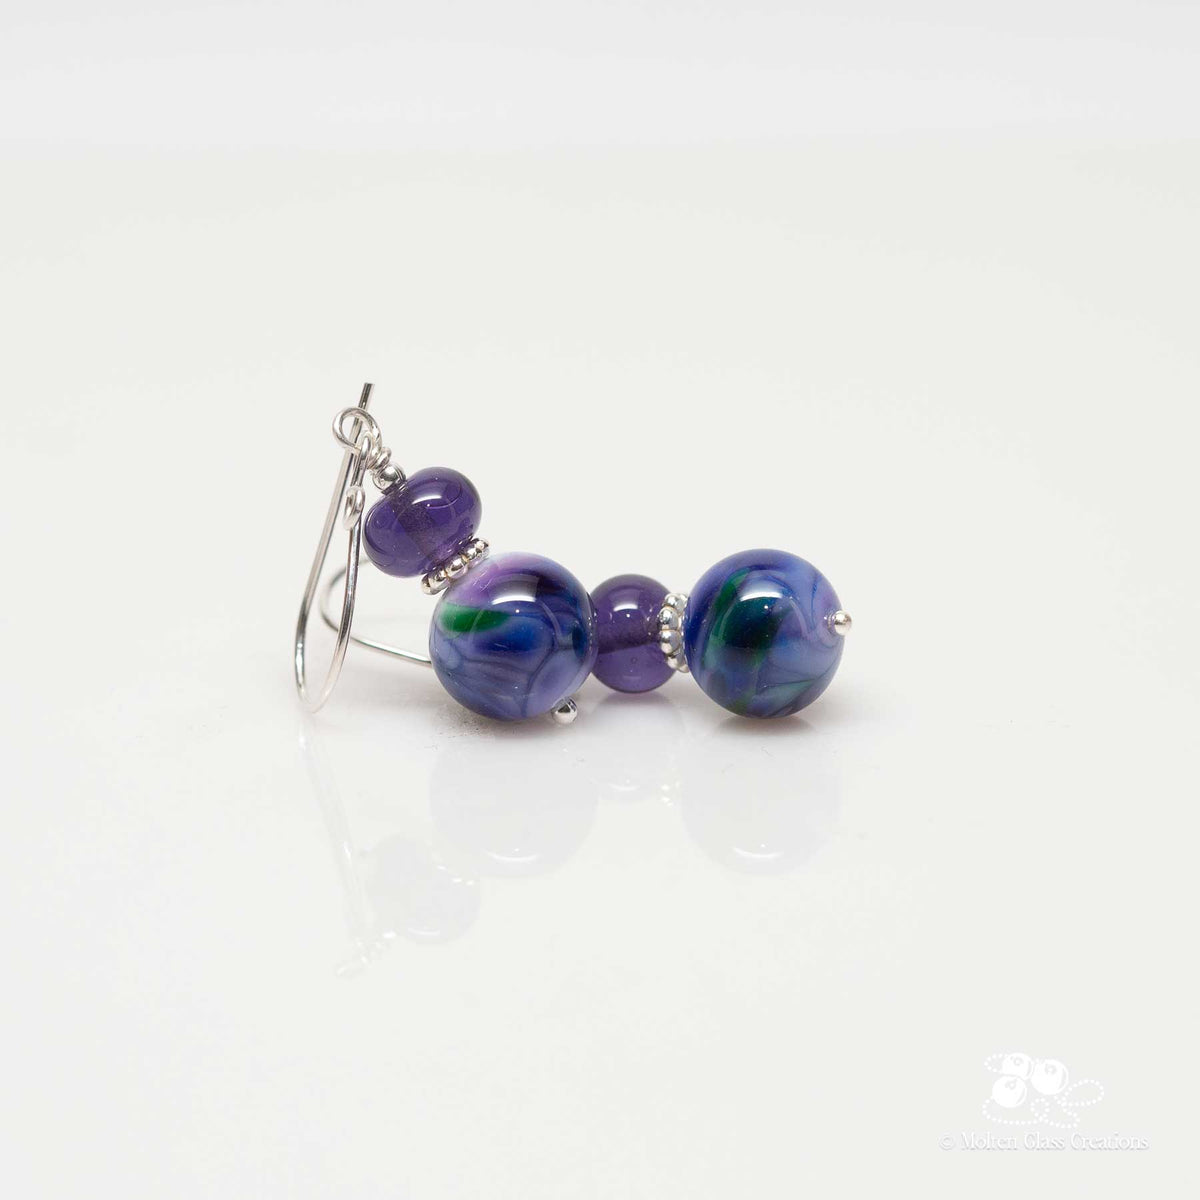 earrings with a purple marble style look